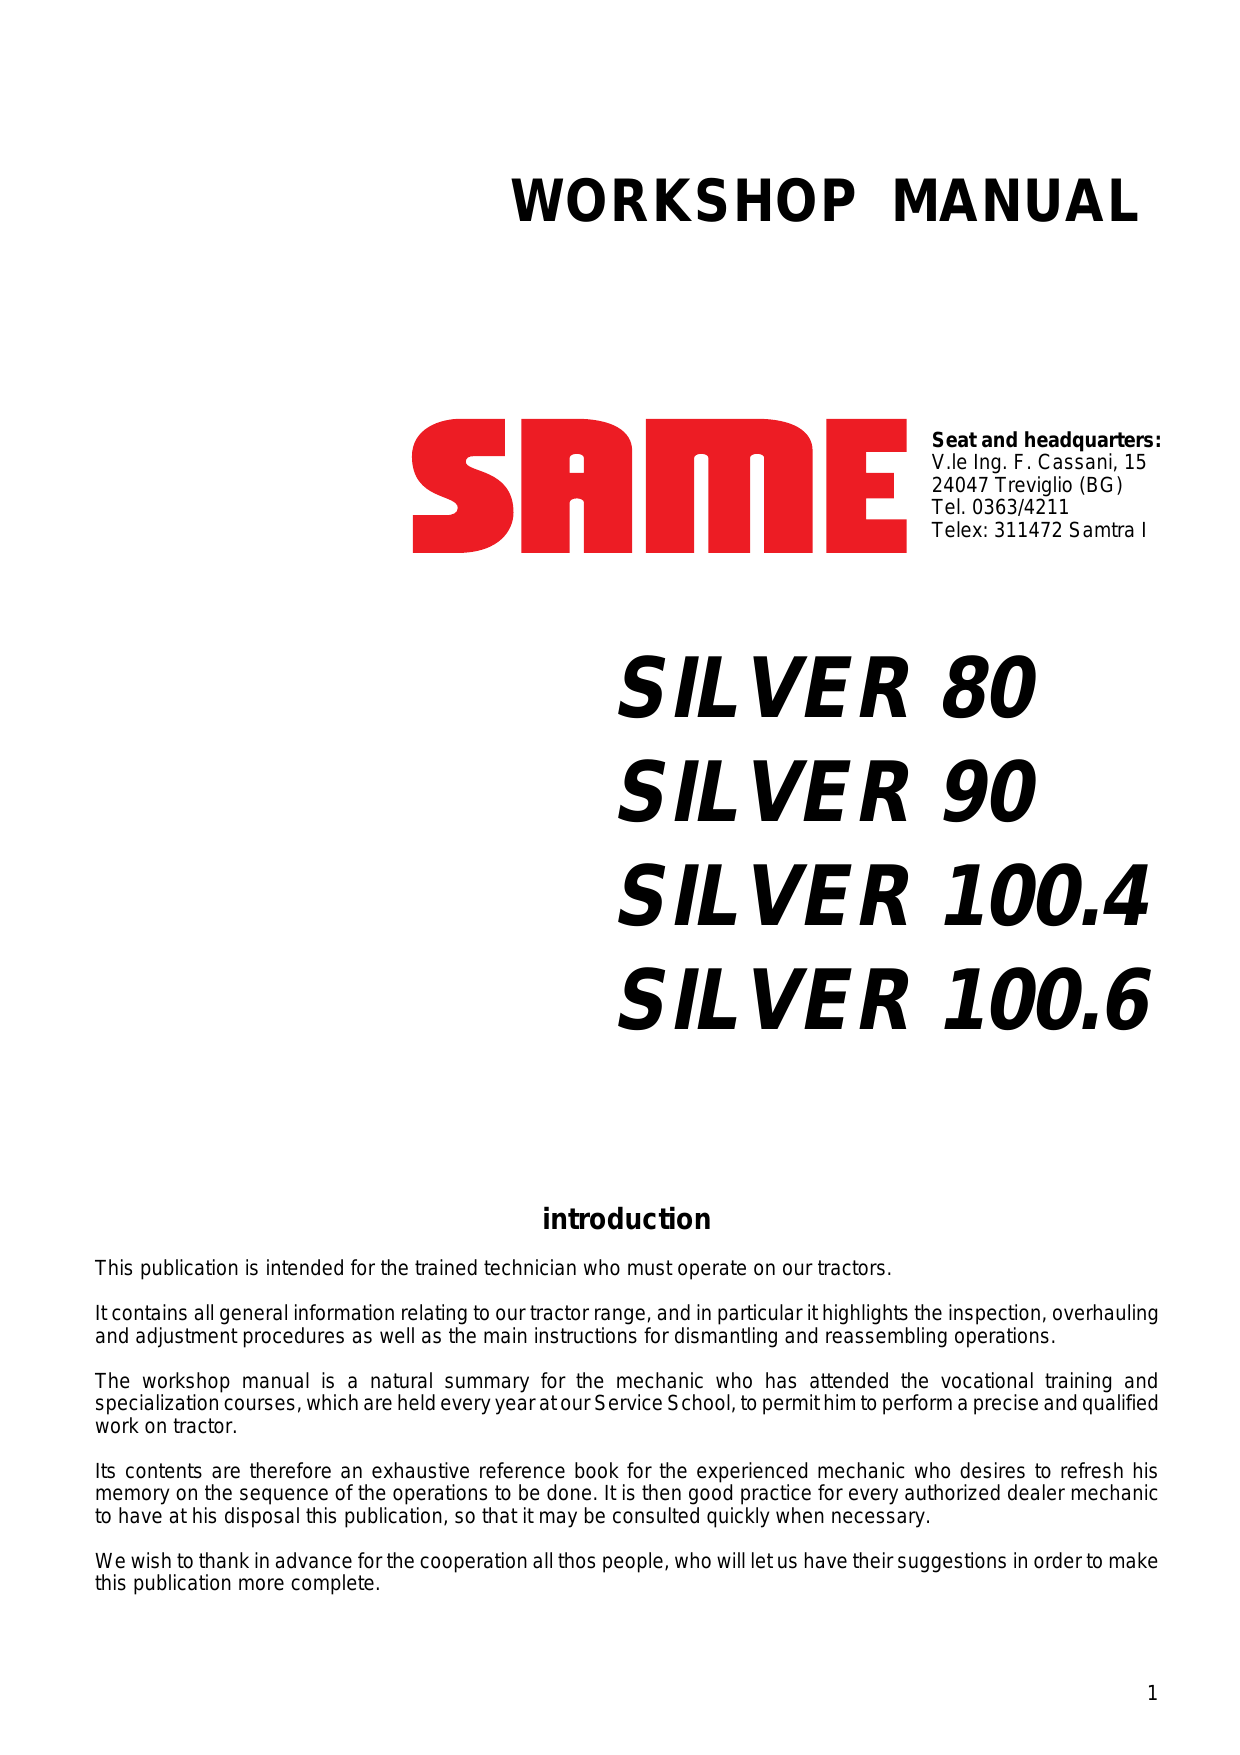 Same Silver 80, 90, 100.4, 100.6 tractor workshop manual Preview image 1